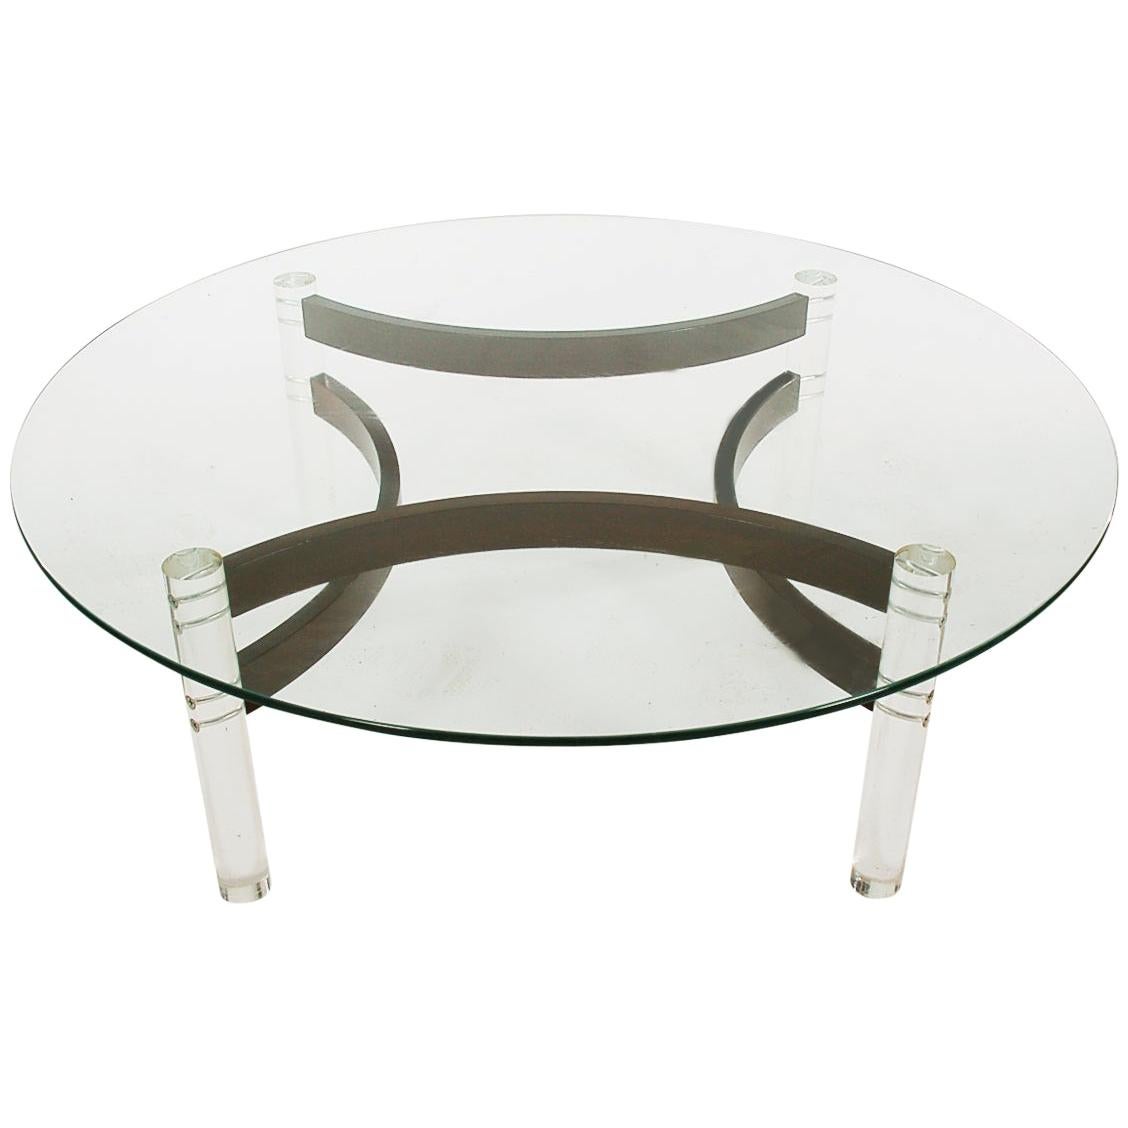 Midcentury Danish Modern Lucite, Bentwood and Glass Circular Cocktail Table